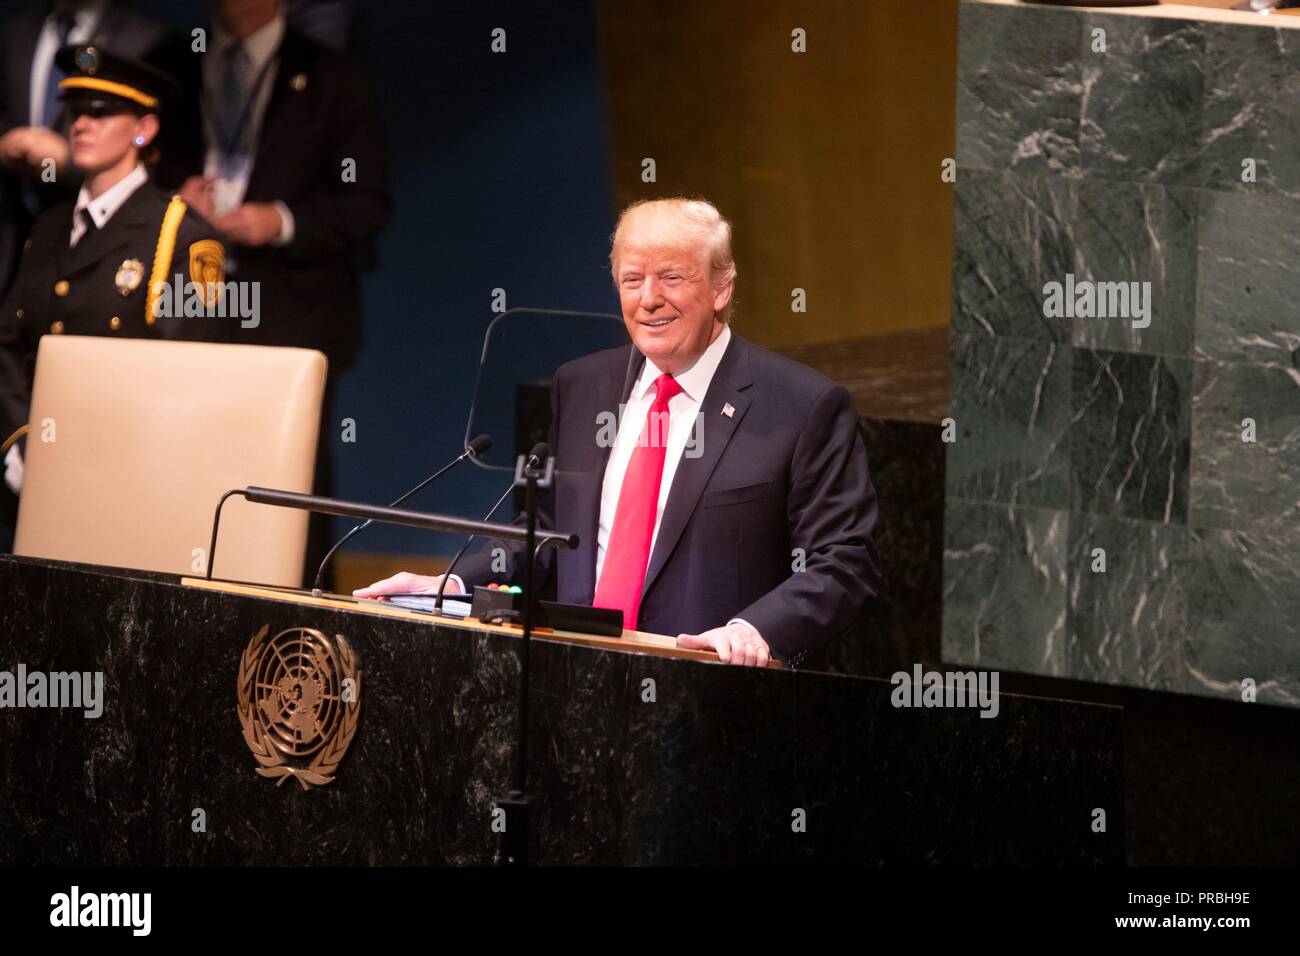 U.S President Donald Trump chuckles during his address to the 73rd session of the U.N. General Assembly at the United Nations Headquarters September 25, 2018 in New York, New York. Trump was responding after the audience of world leaders openly laughed at Trump after bragging that he 'accomplished more than any American President in history'. Stock Photo